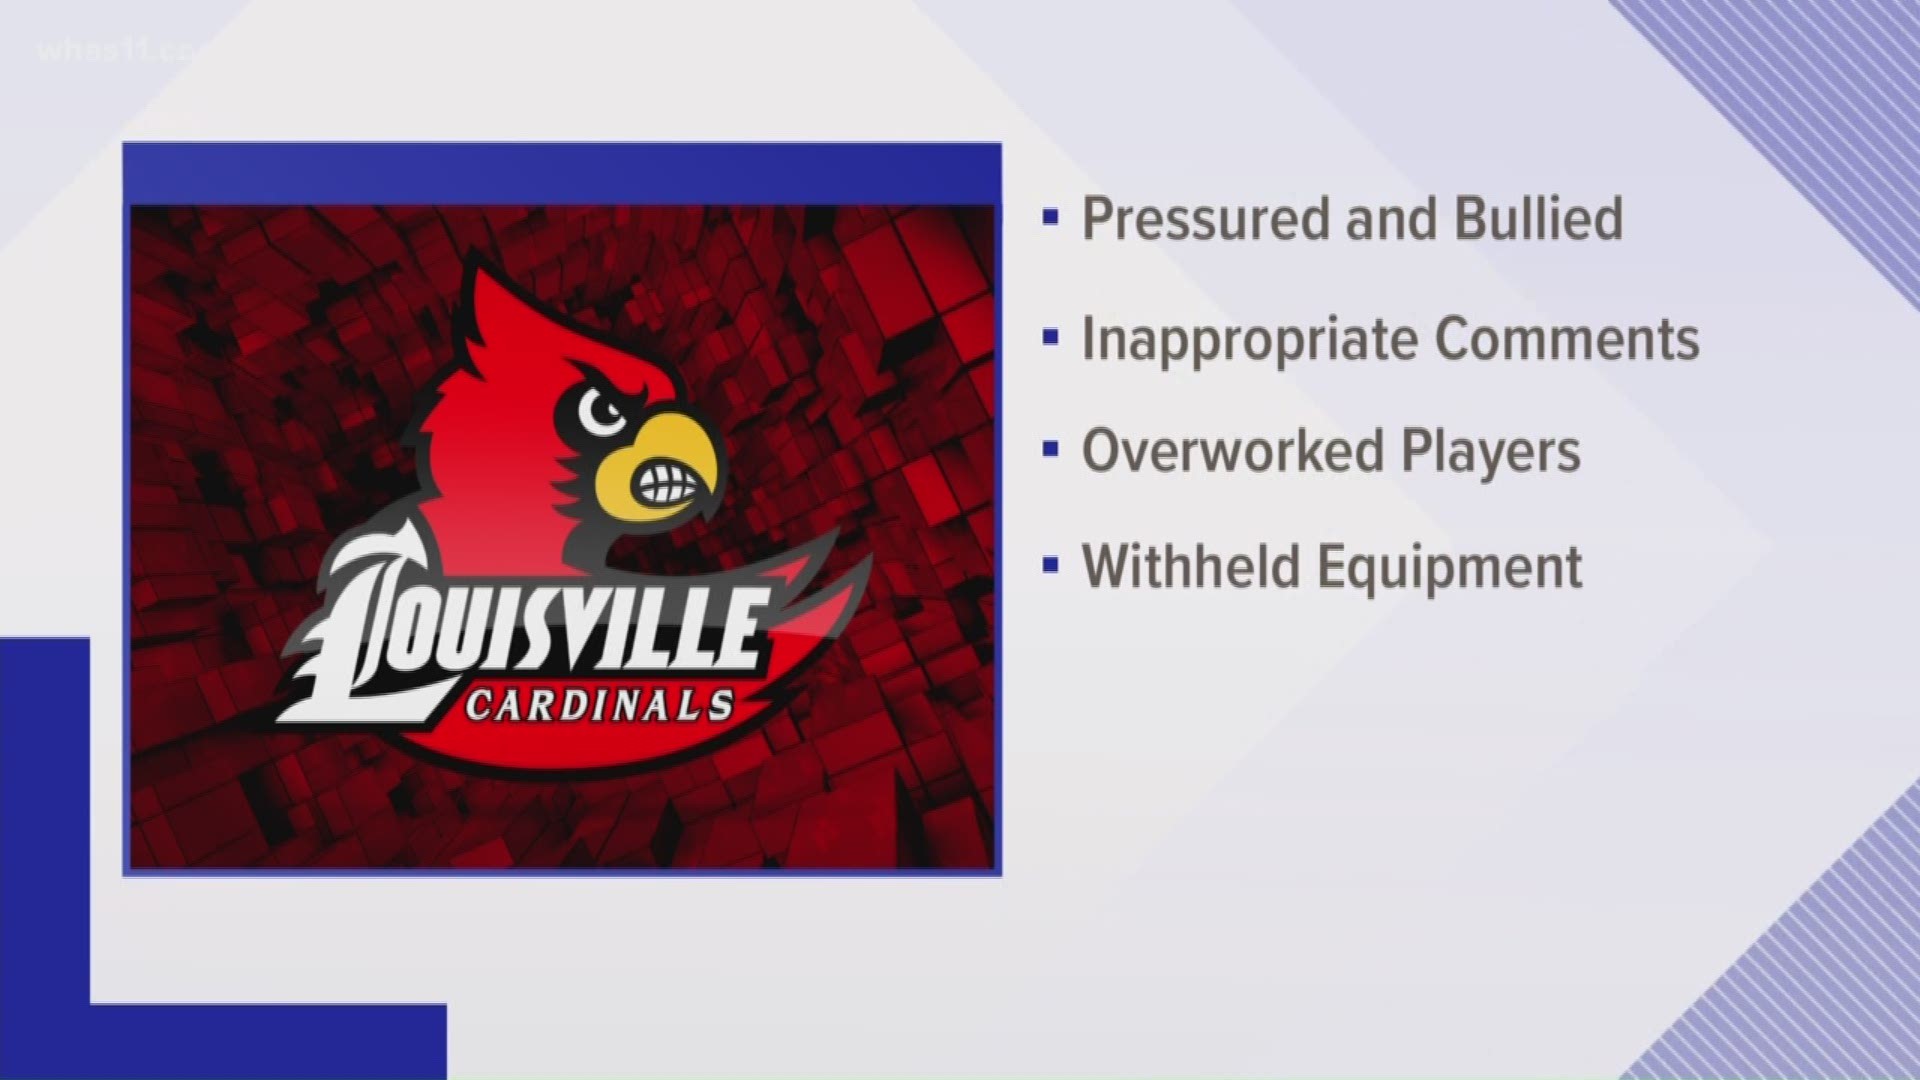 The University of Louisville released the findings of their investigation that led to the firing of longtime soccer coach, Rex Ecarma.